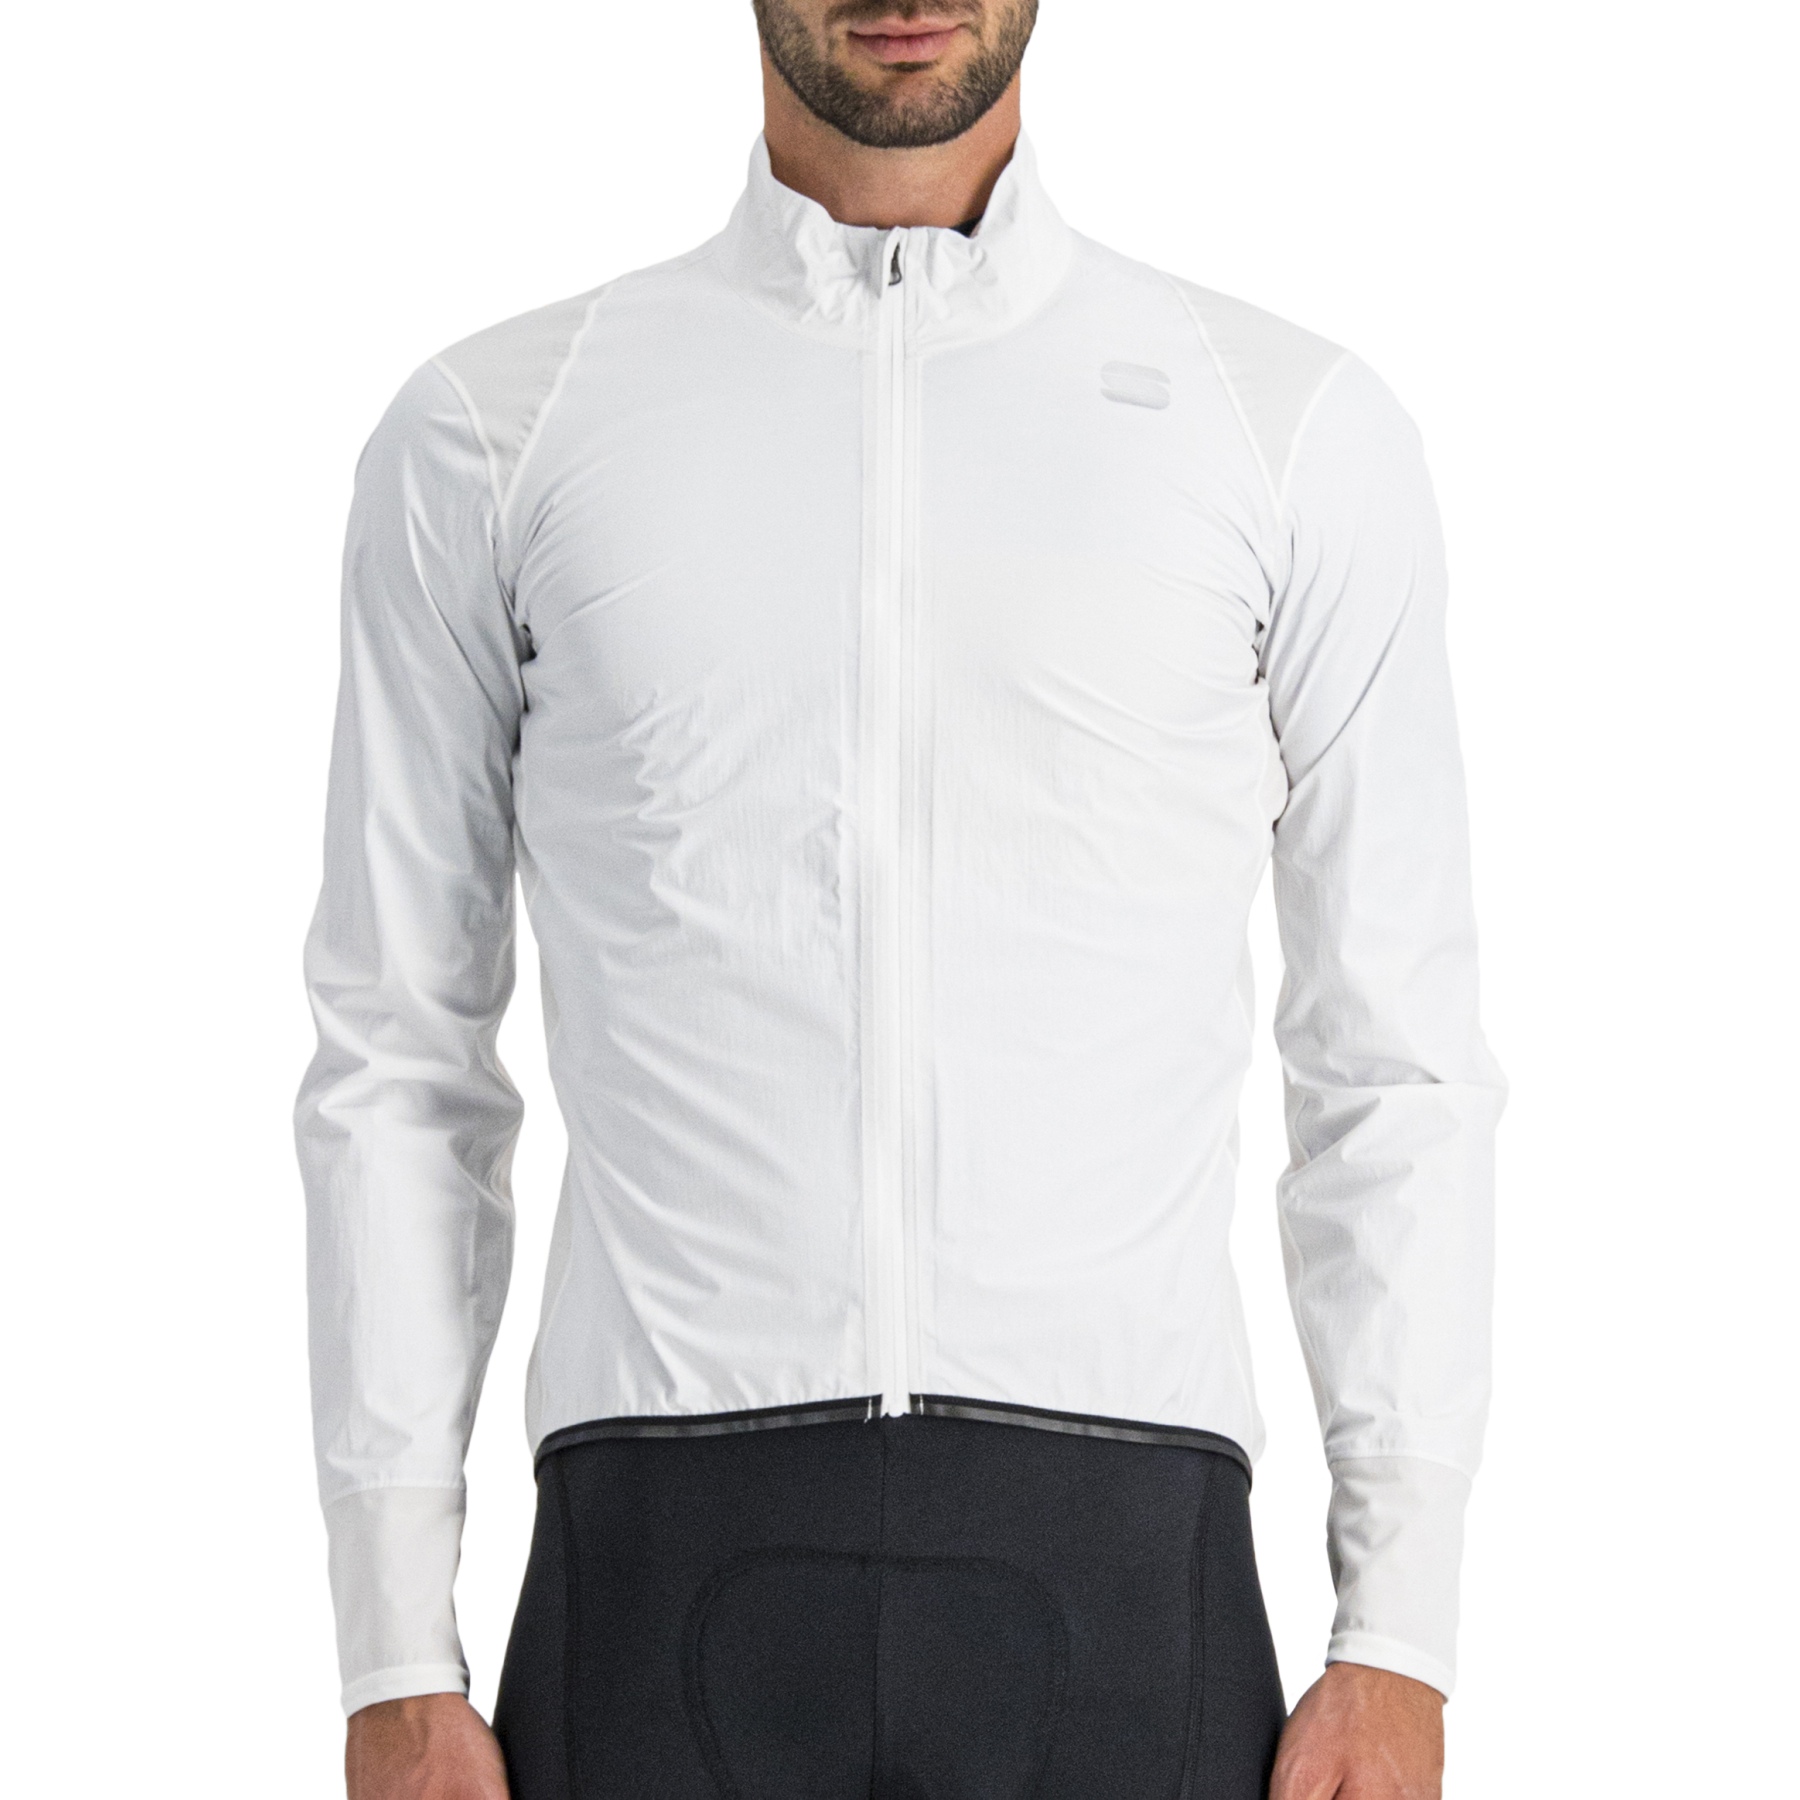 Picture of Sportful Hot Pack NoRain Jacket Men - 101 White